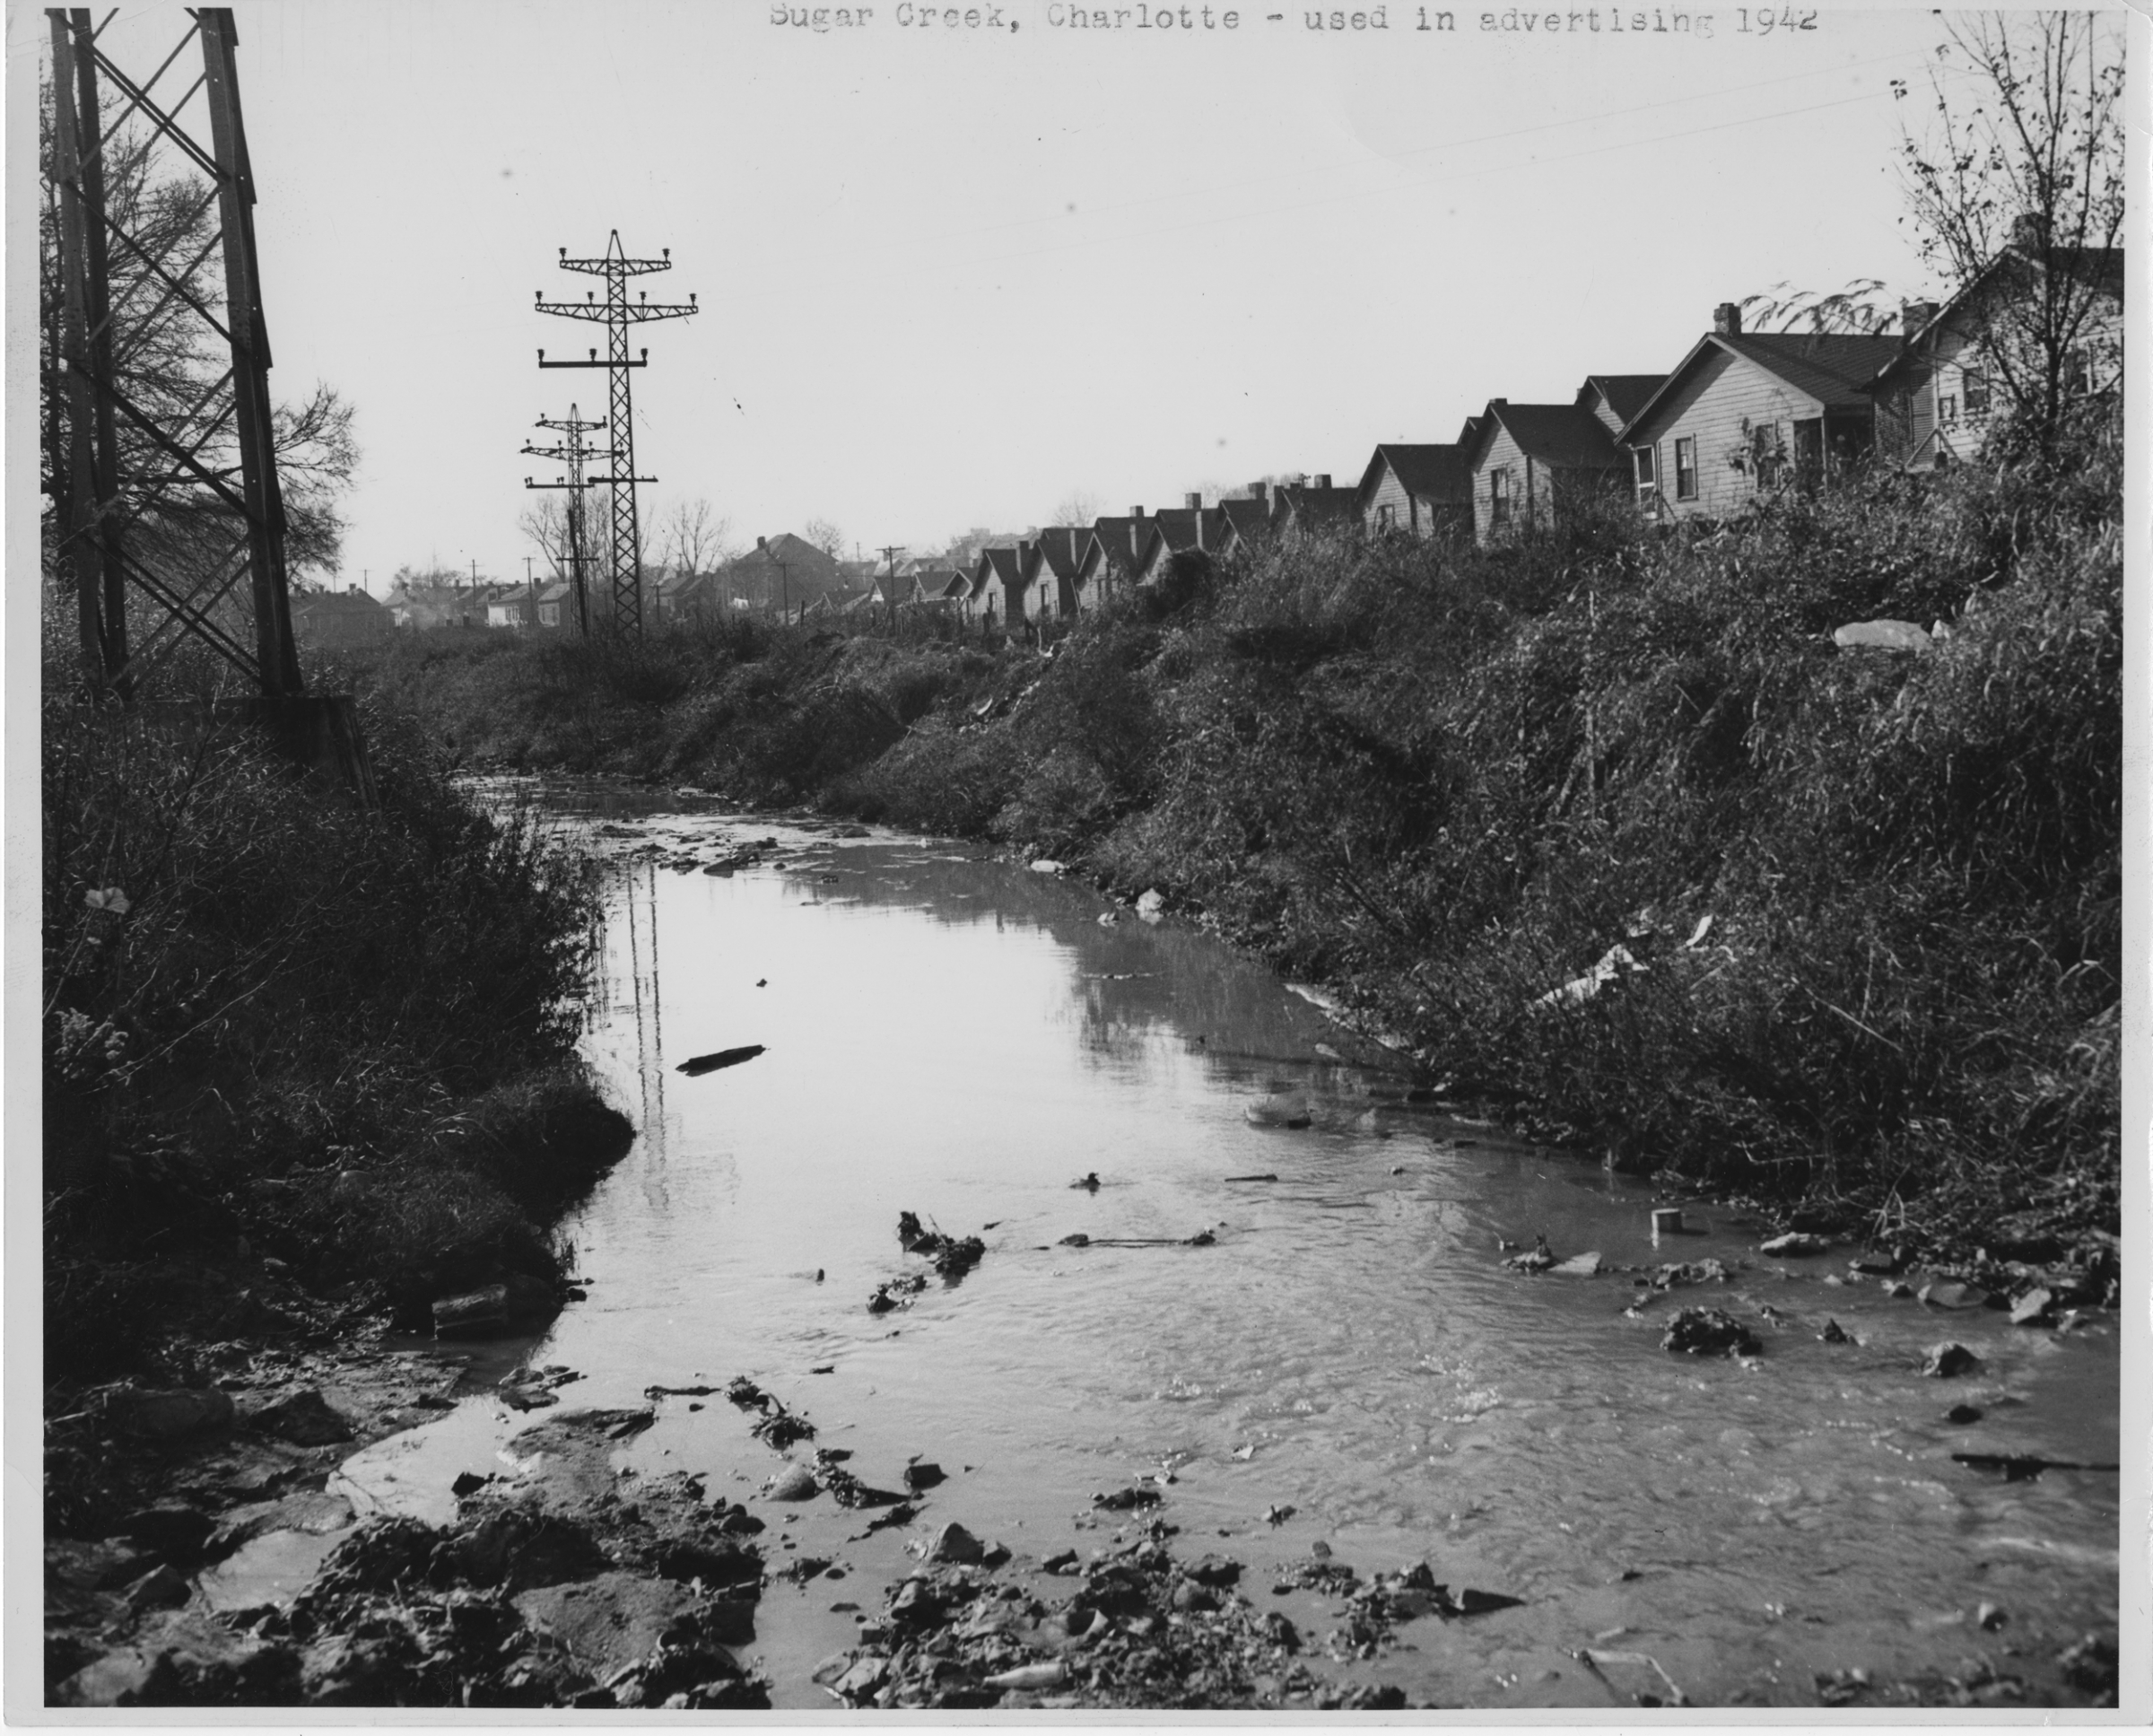 1942 image of houses near Little Sugar Creek. Photo courtesy Photo courtesy of Beaumert Whitton Papers, UNC Charlotte Atkins Library 